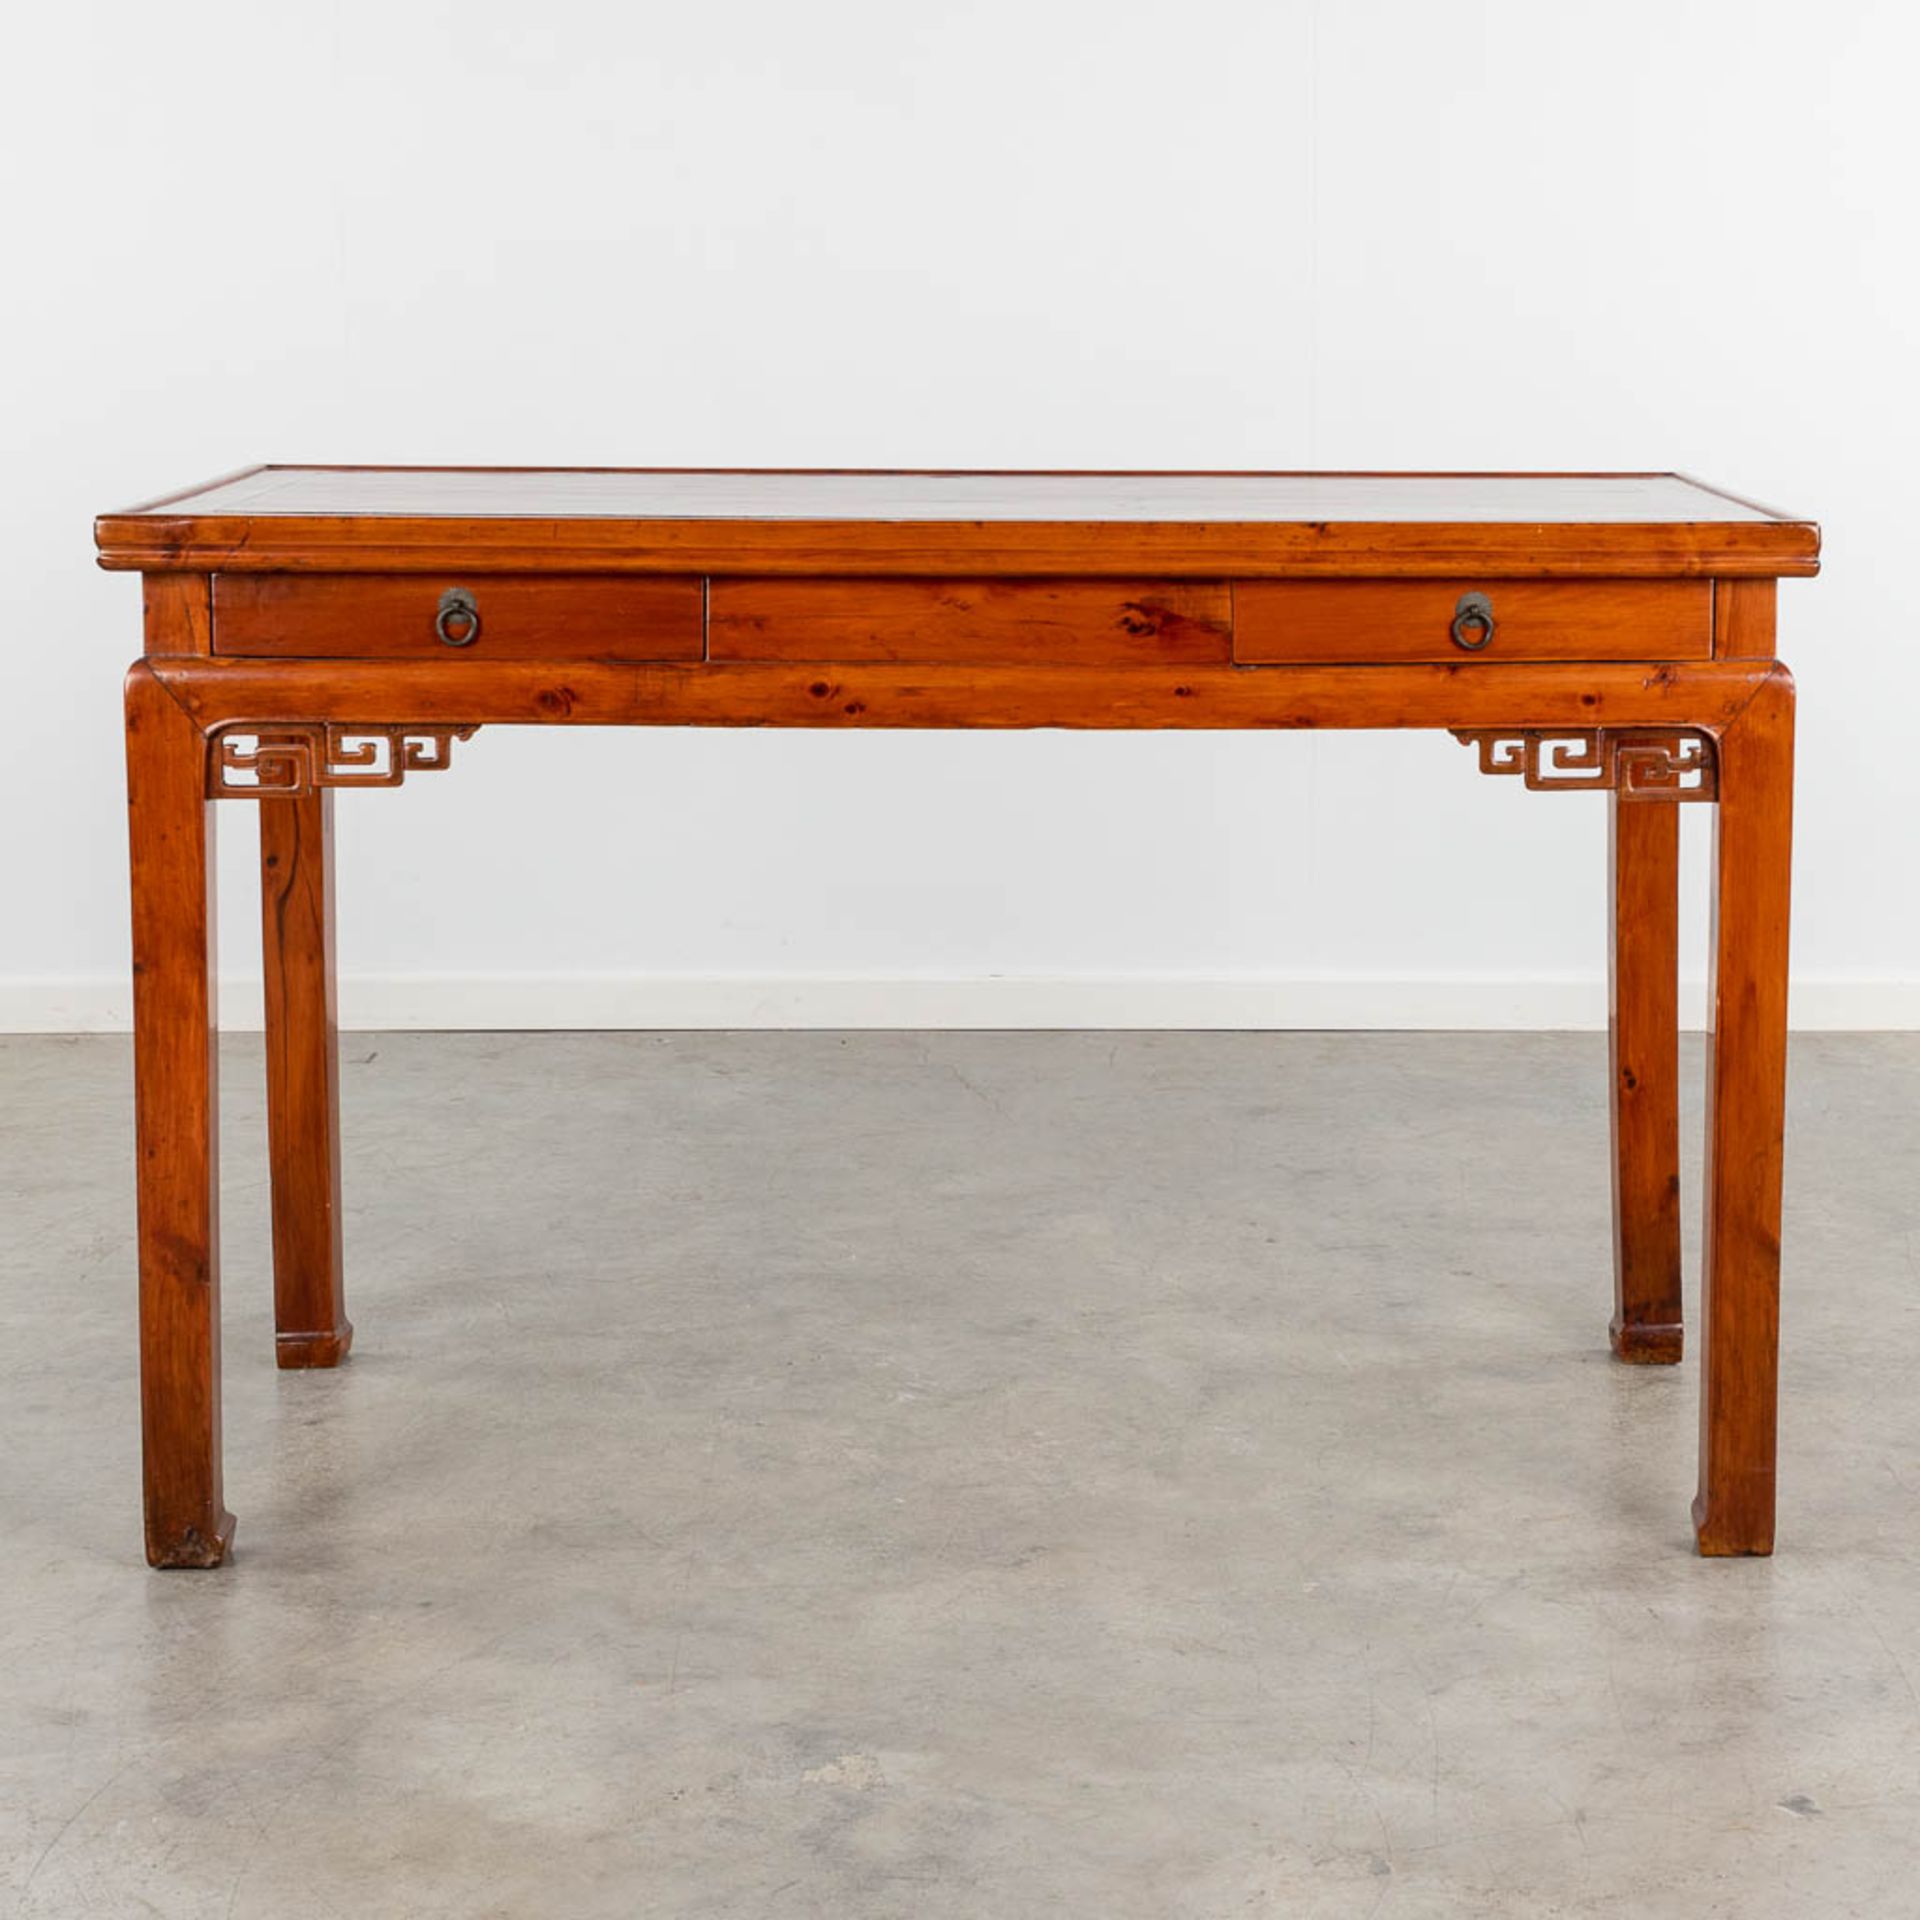 An antique Chinese side table, hardwood. (L:60 x W:130 x H:82 cm) - Image 3 of 15